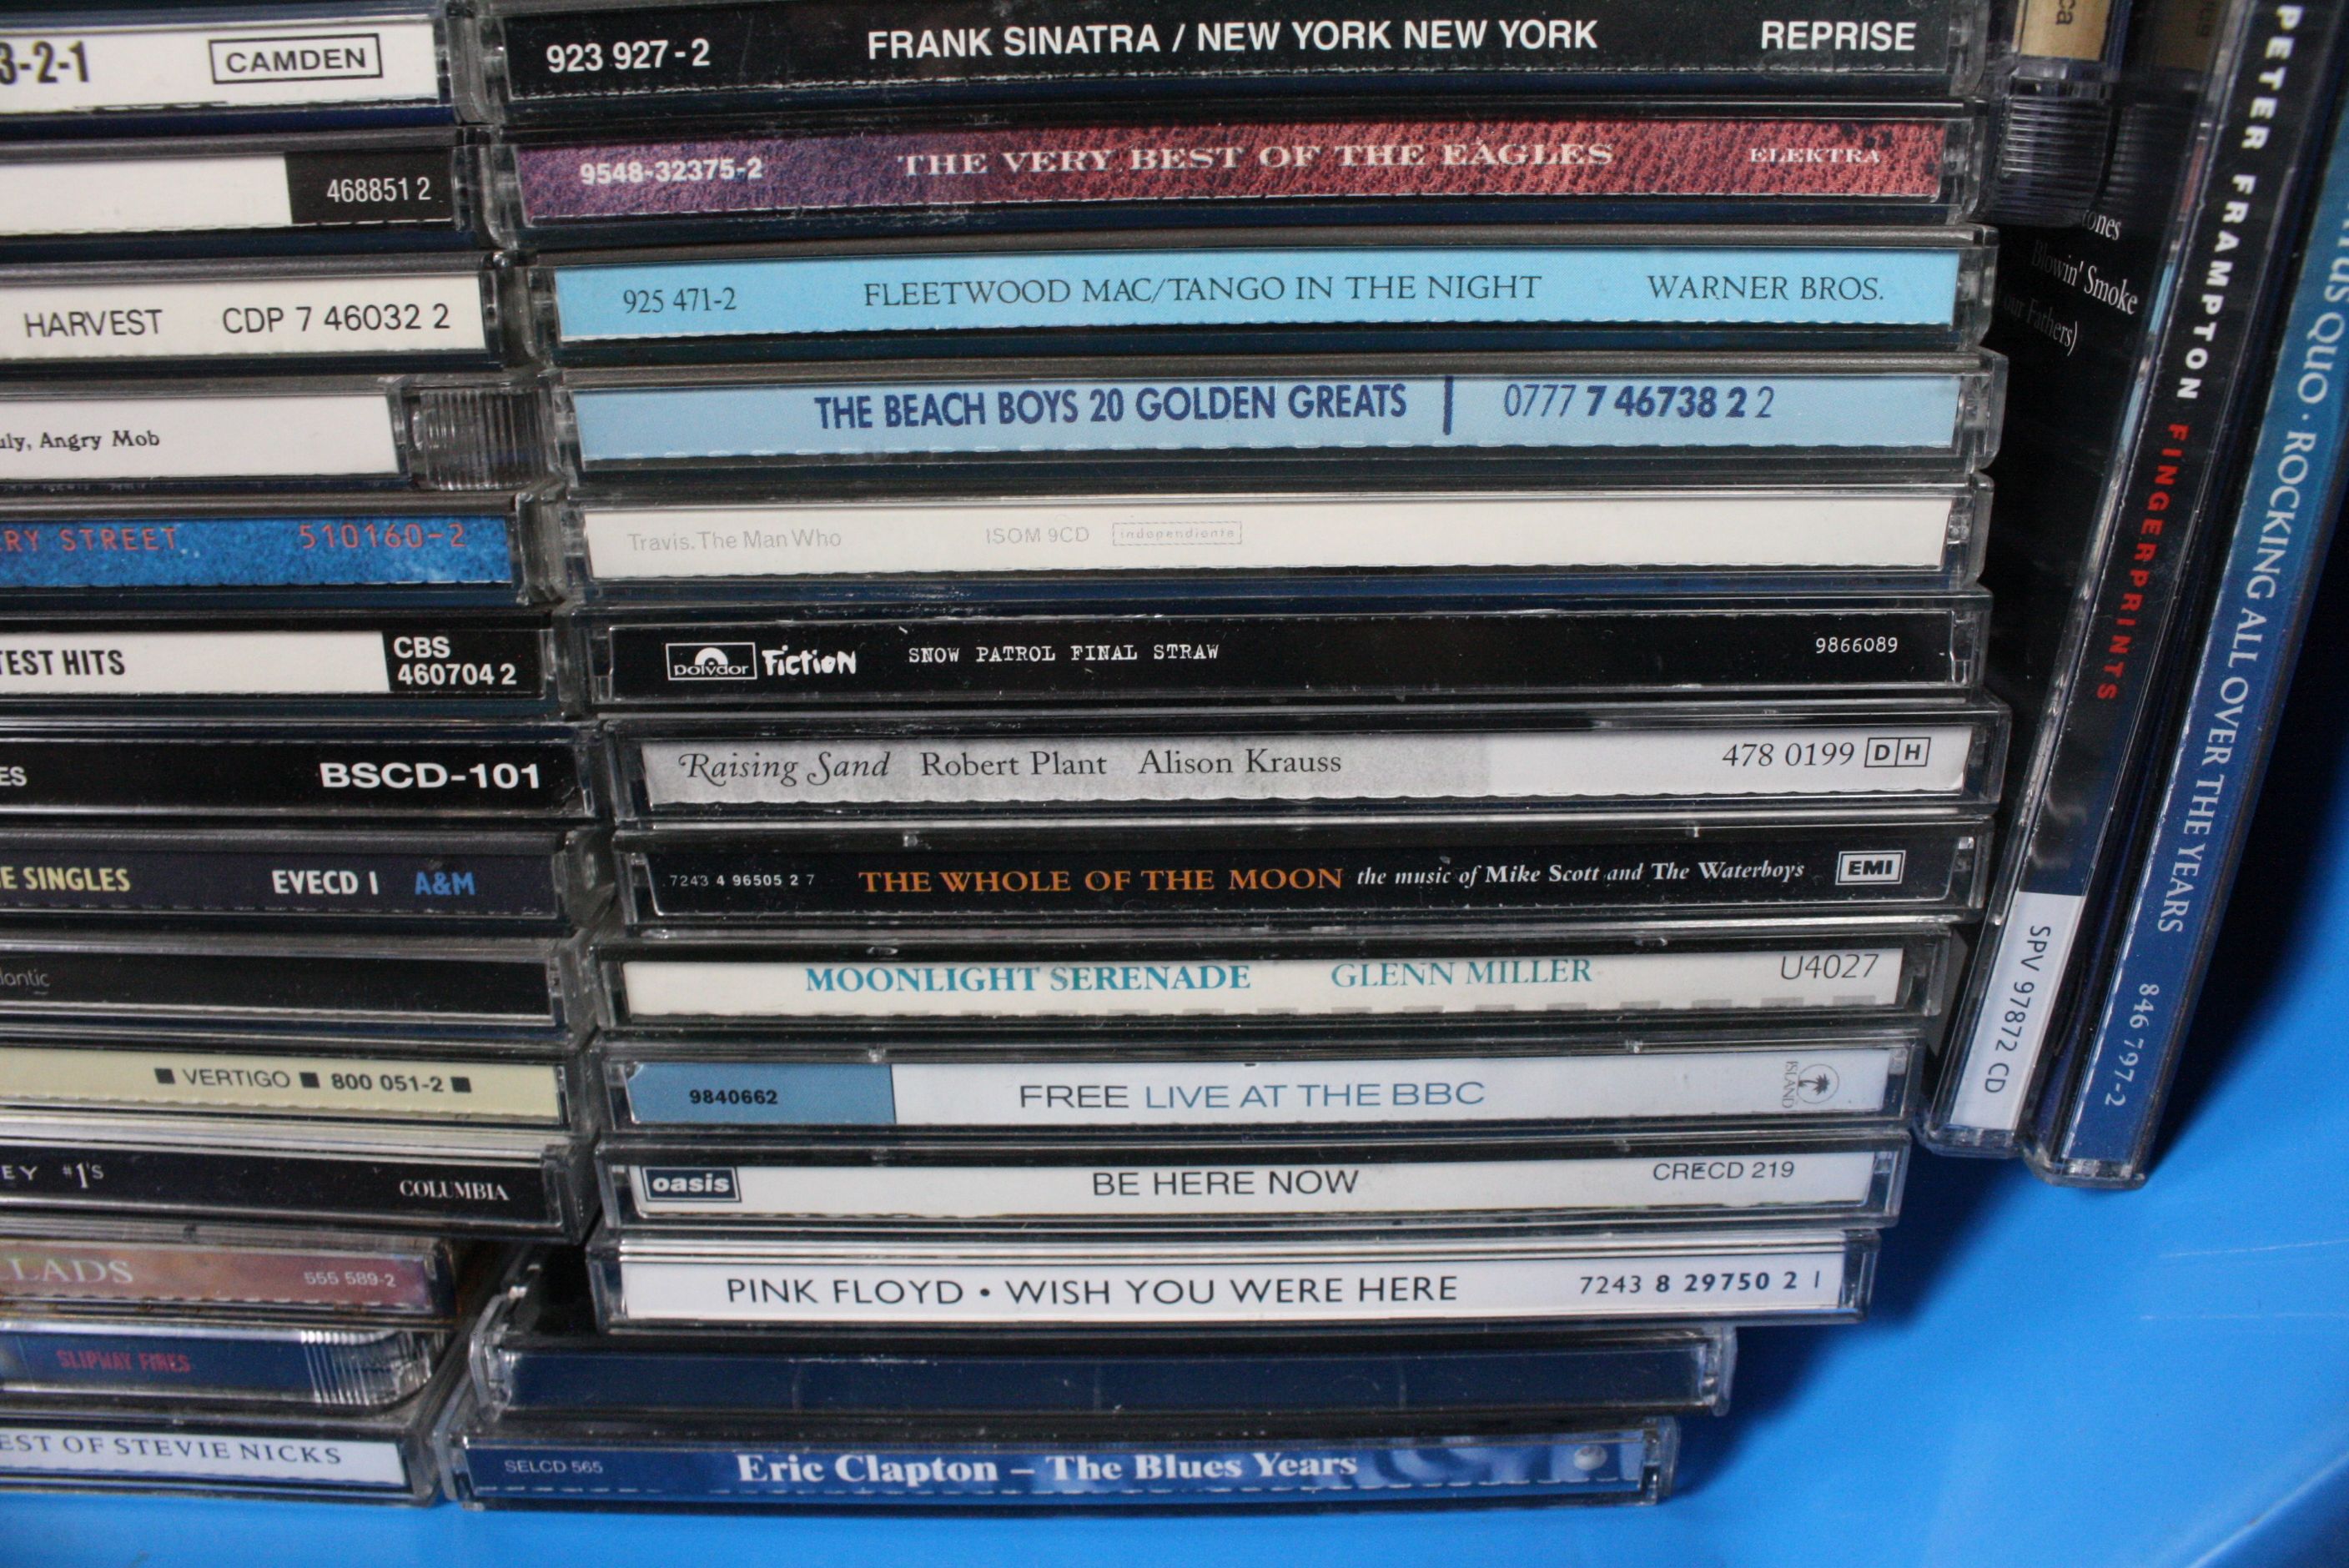 CDs / DVDs - Approx 100 CDs and 6 DVDs to include Dire Straits, Led Zeppelin (2 DVDs), Coldplay, - Image 8 of 10